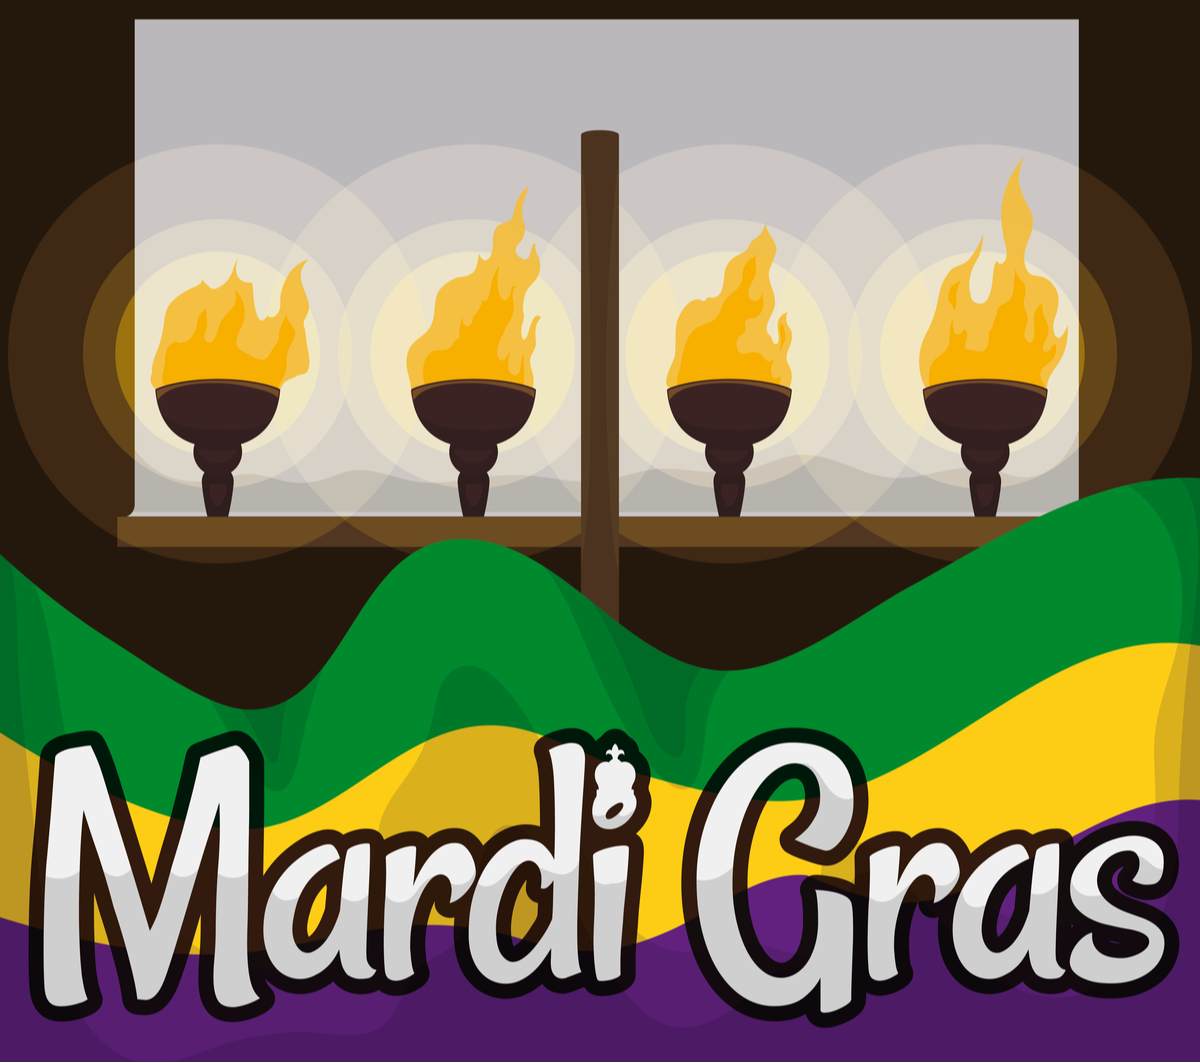 A cartoon image of a modern day flambeaux set up, with a Mardi Gras flag in the foreground of the image.